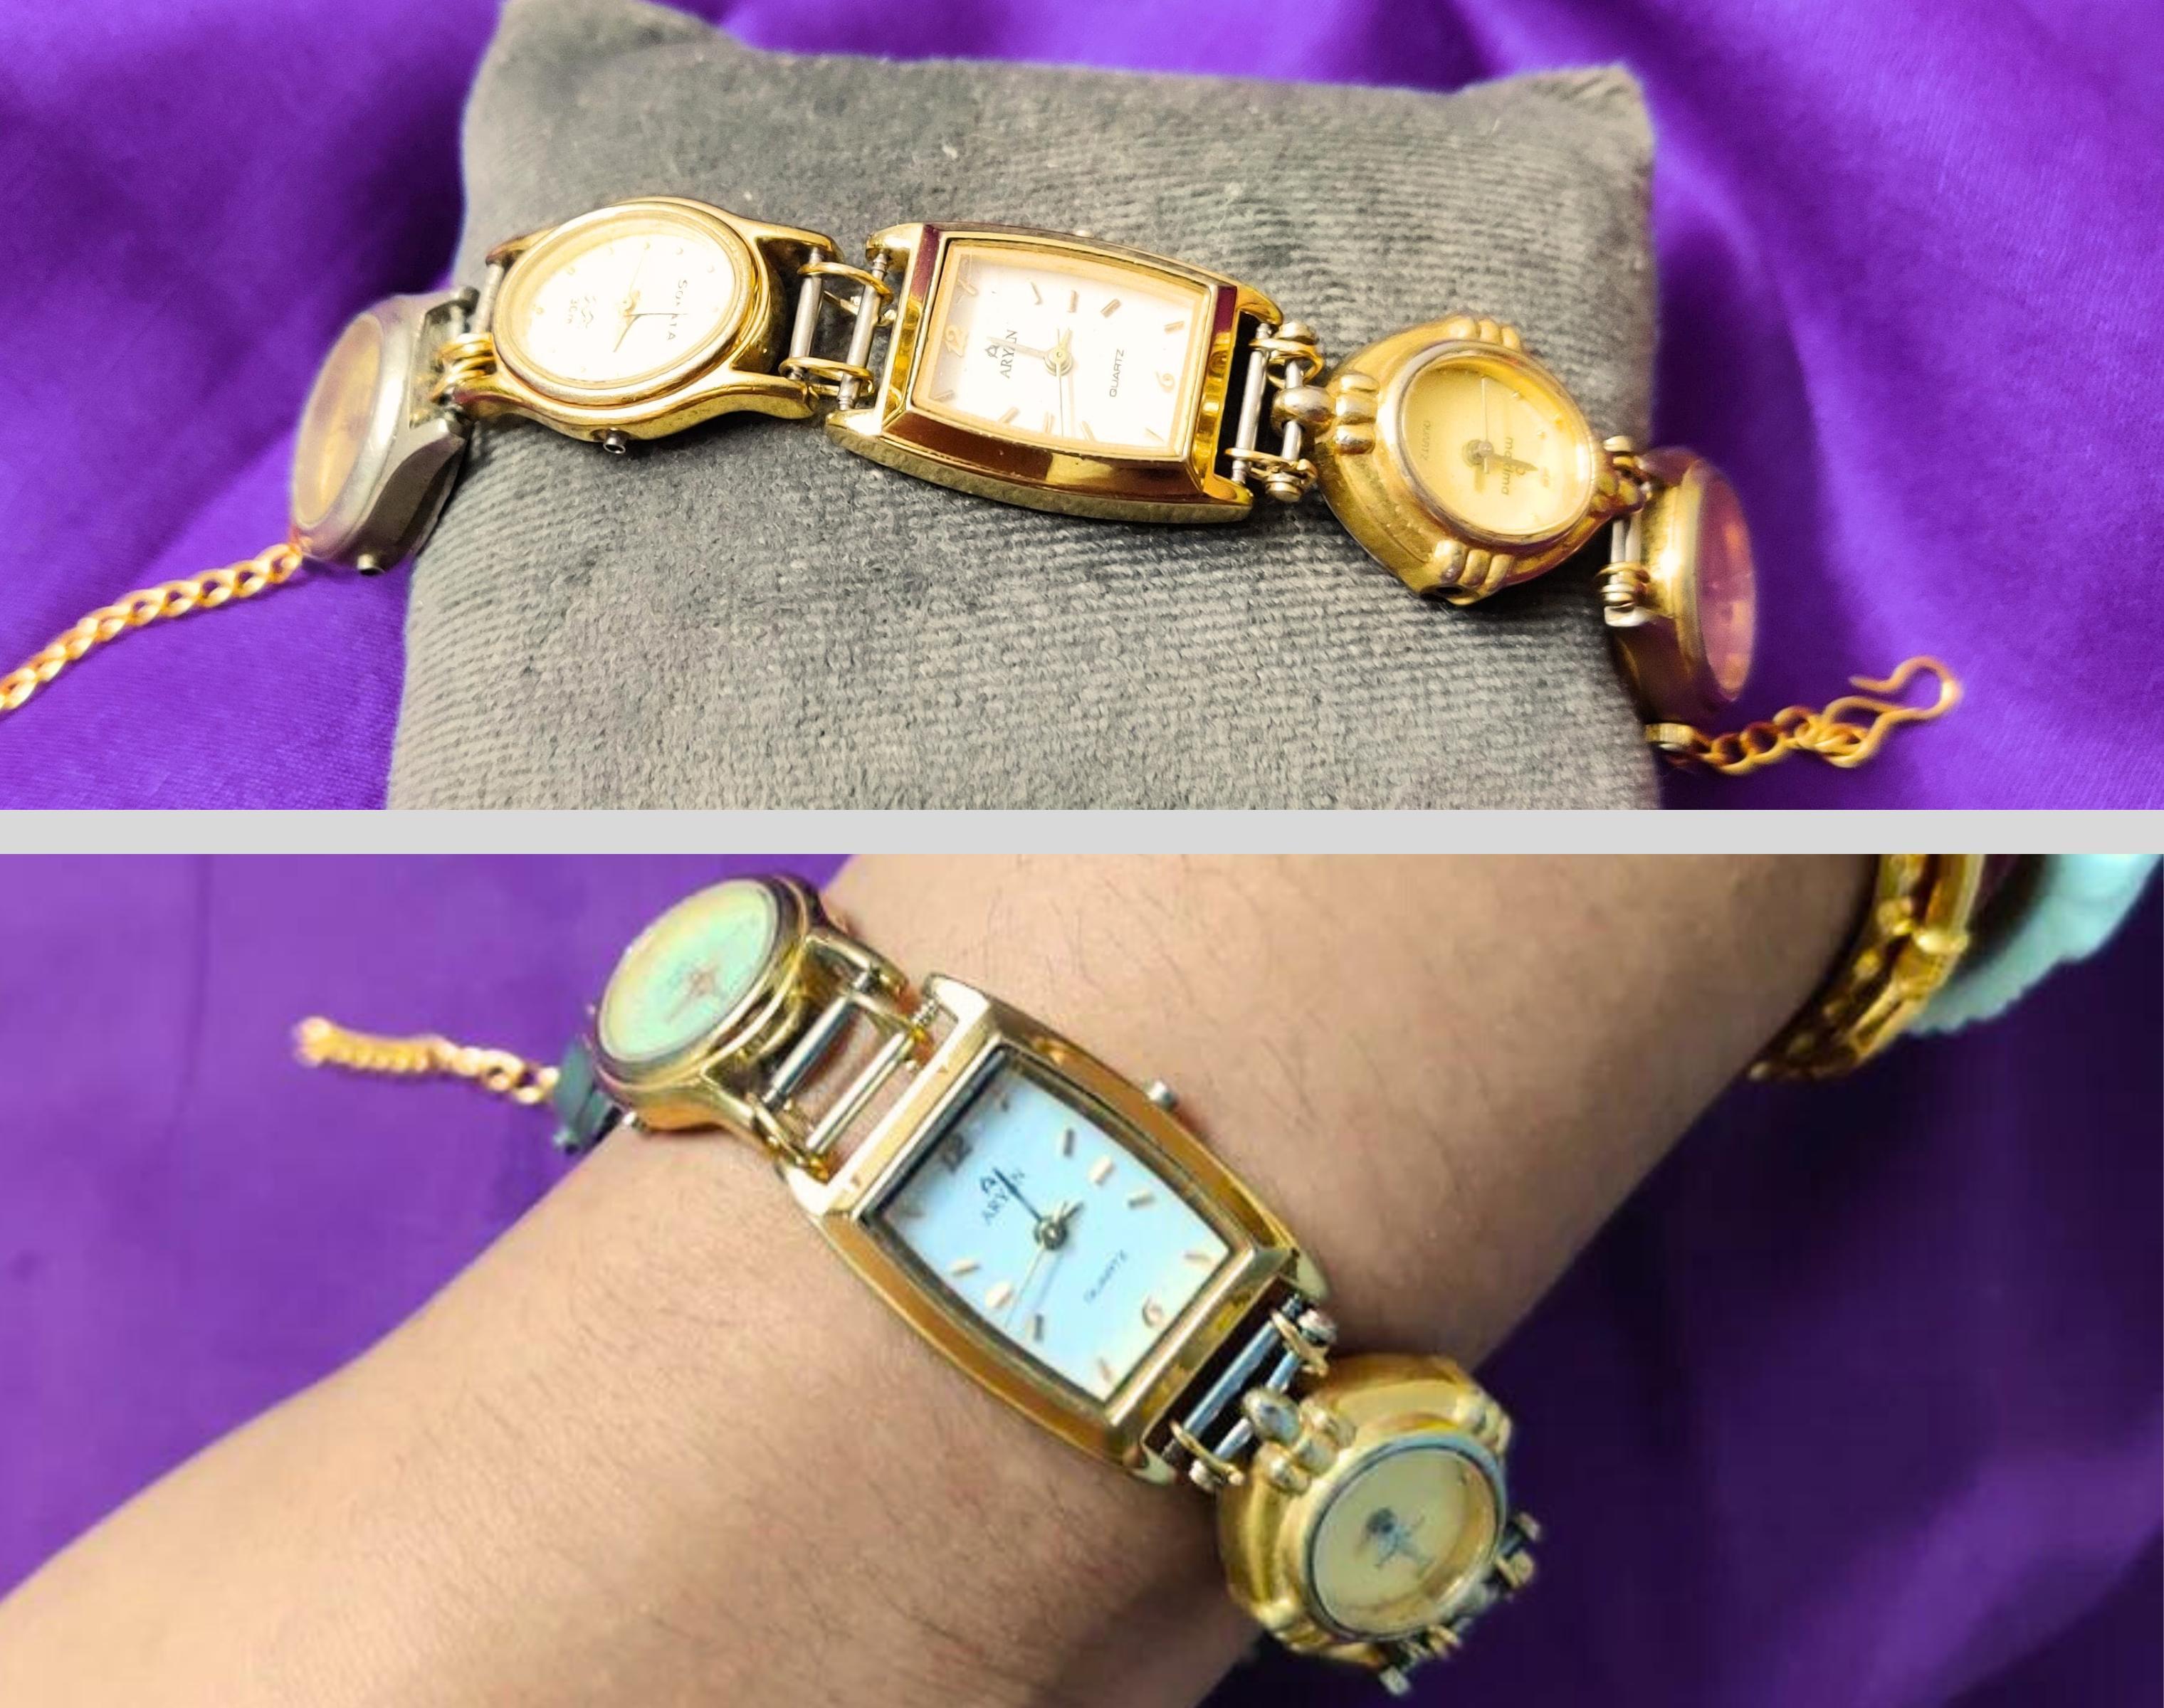 Timeless Elegance: Crafting a Unique Bracelet From Vintage Wristwatch Dials